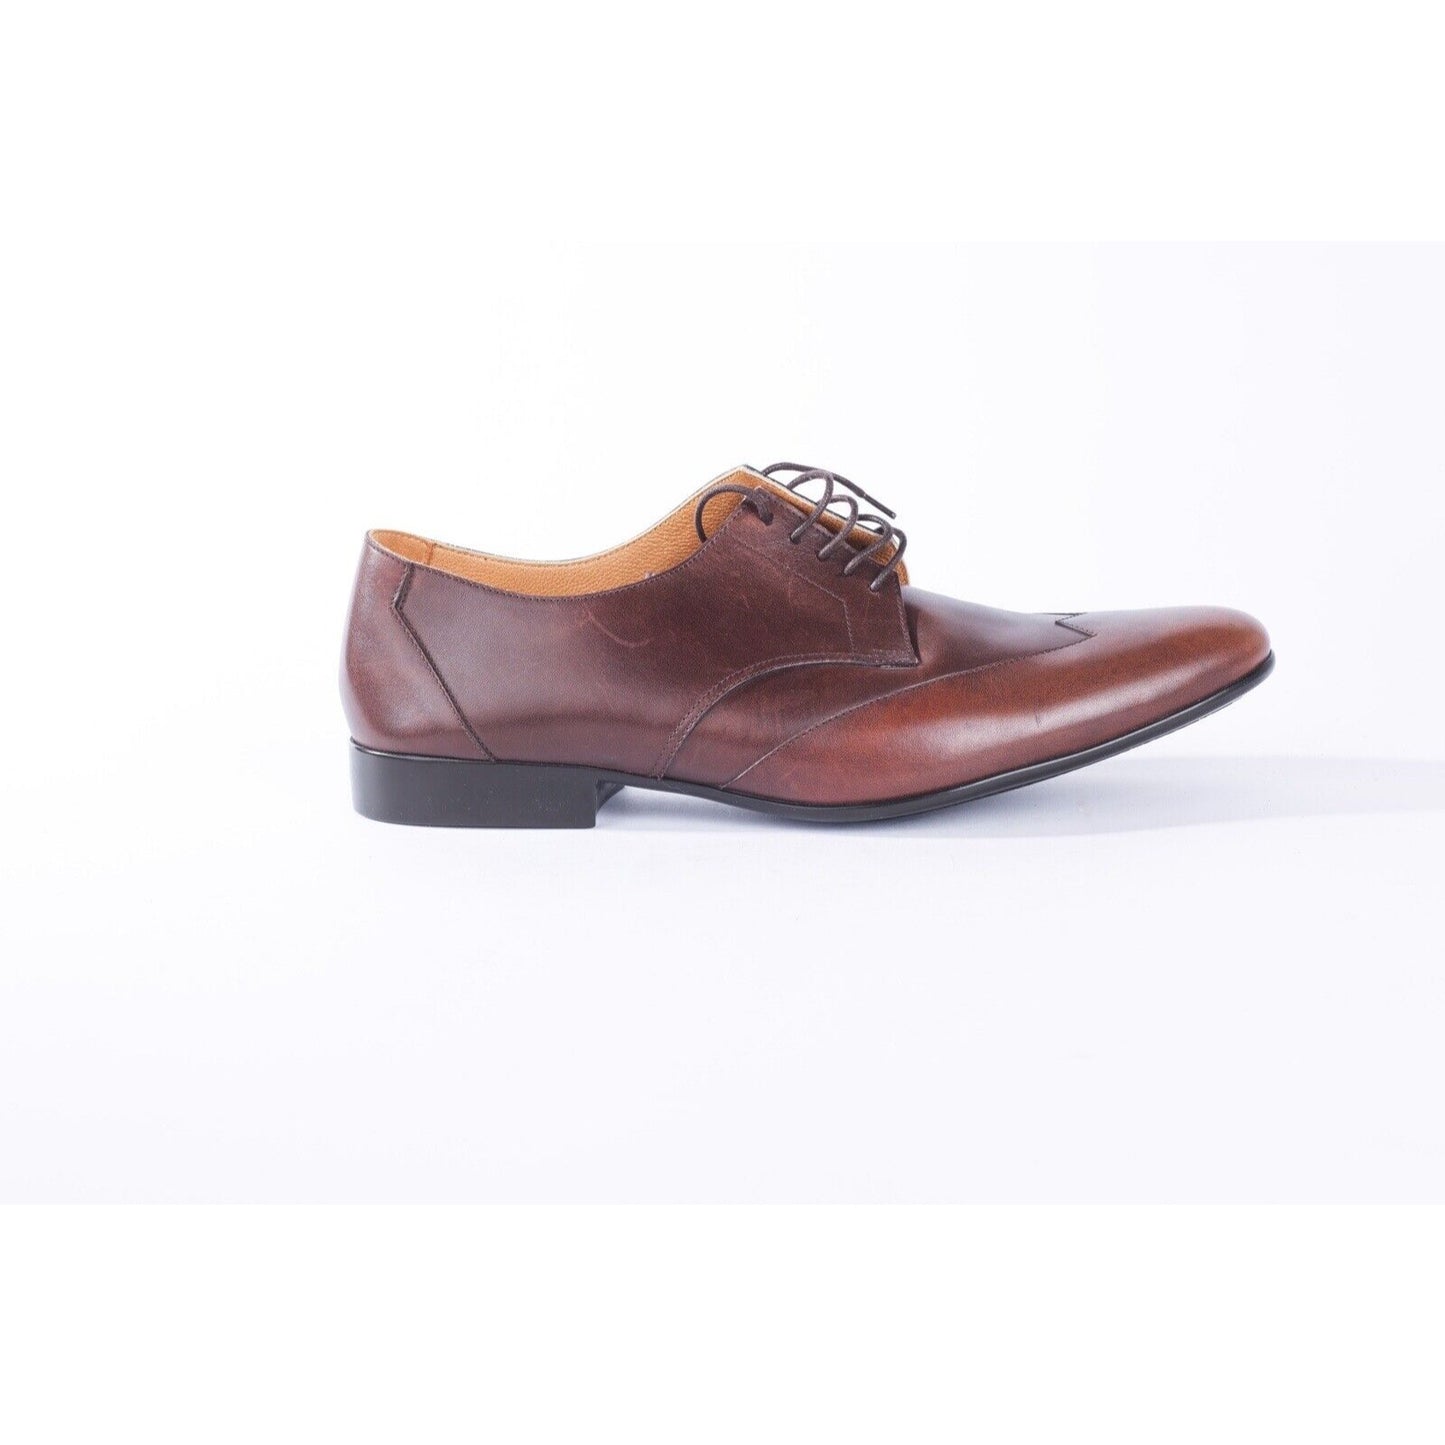 Hermes Men's Section Style Wing-Tip Leather Dress Shoe